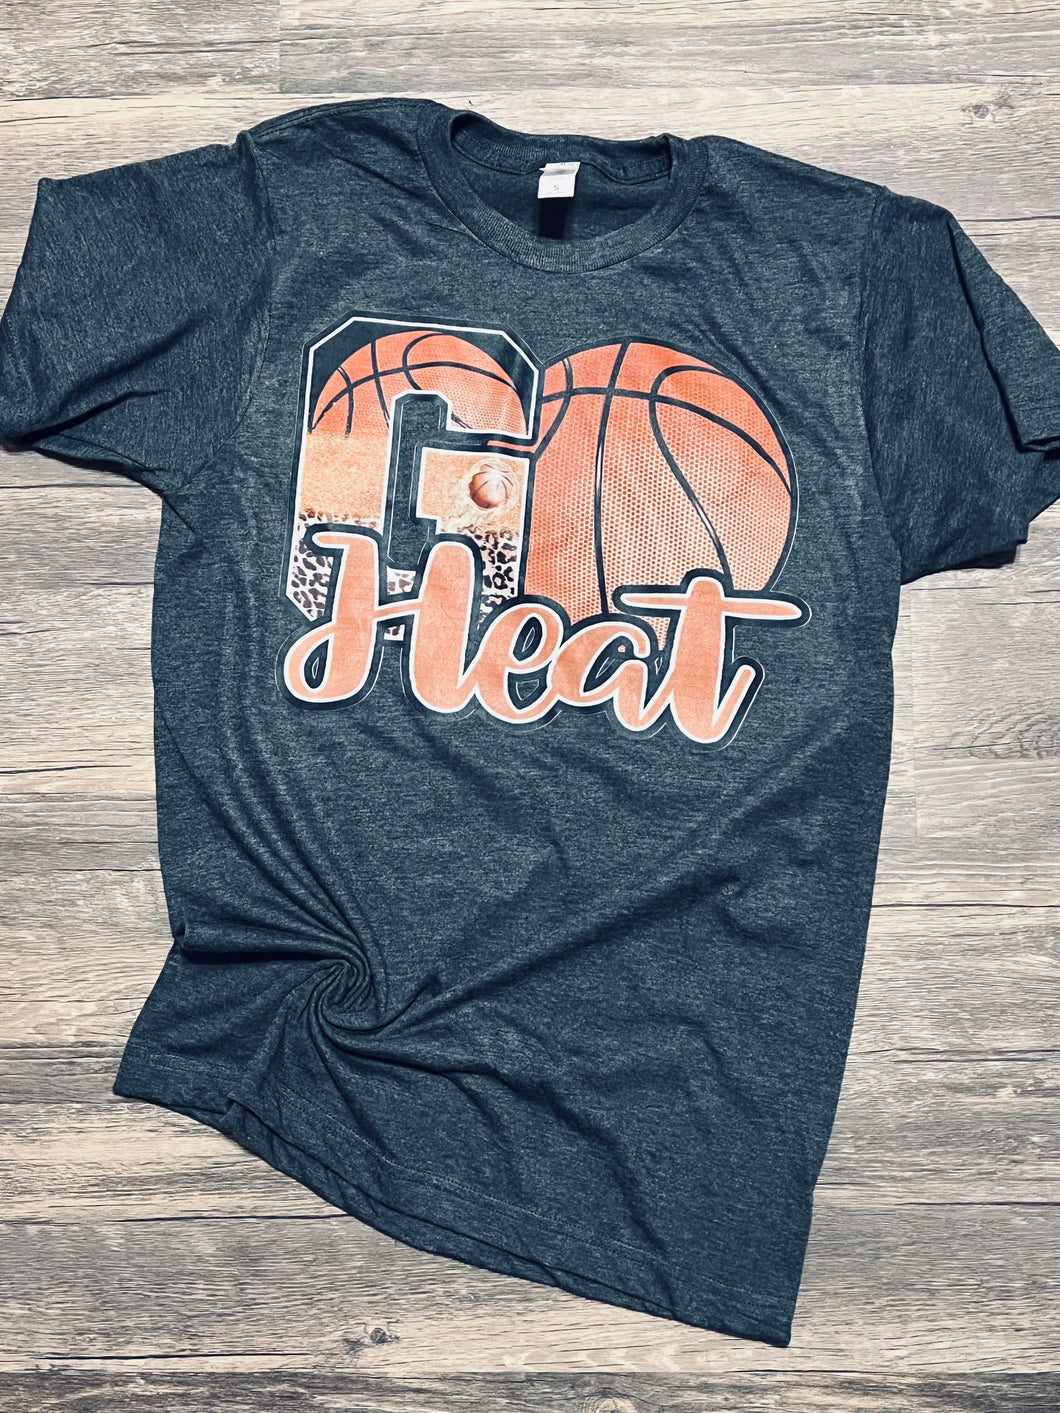 Go Heat. Mommy Daddy & me shirts. Graphic tees. - Mavictoria Designs Hot Press Express